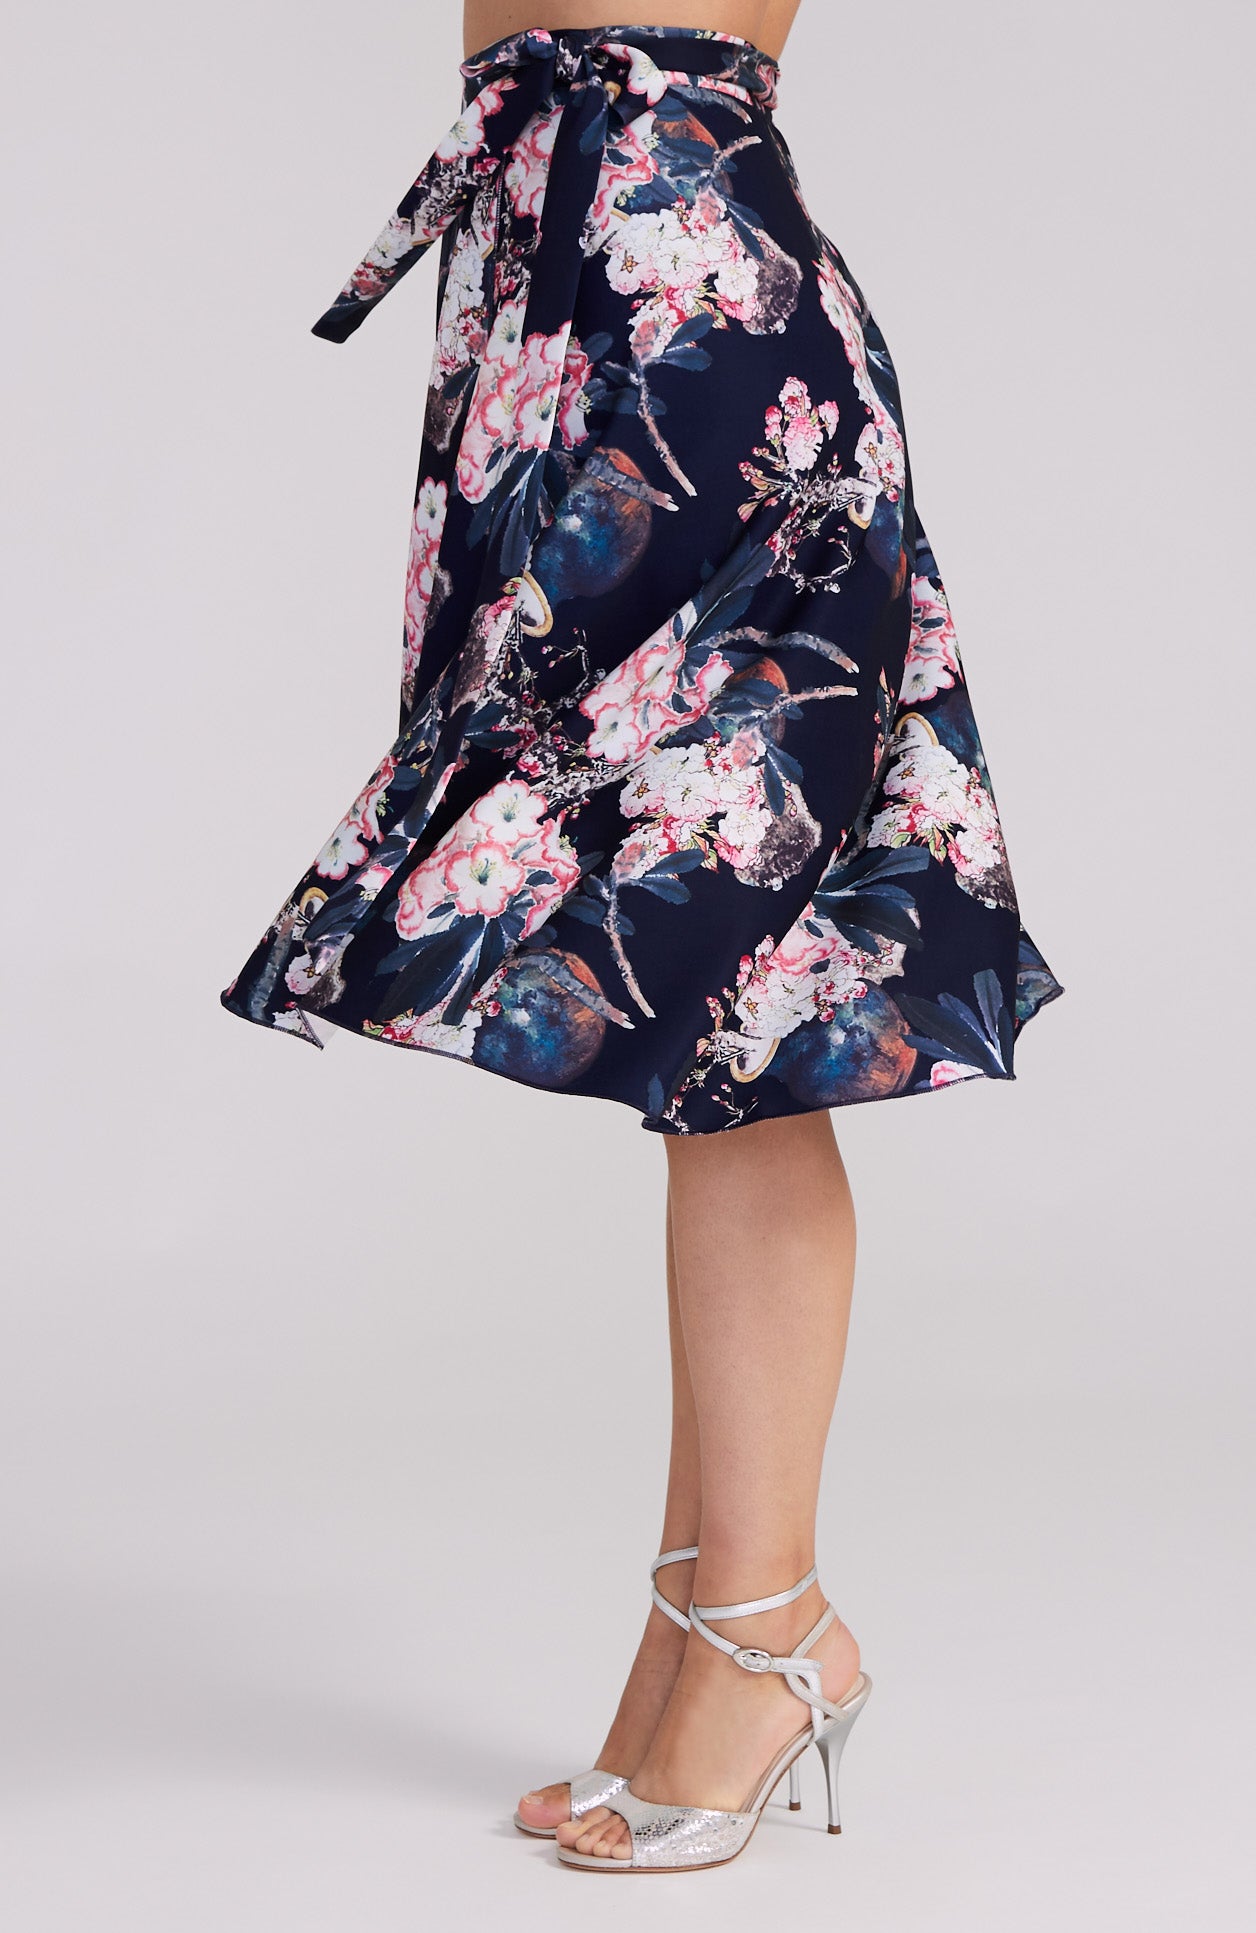 tango skirt in pink florals on navy blue